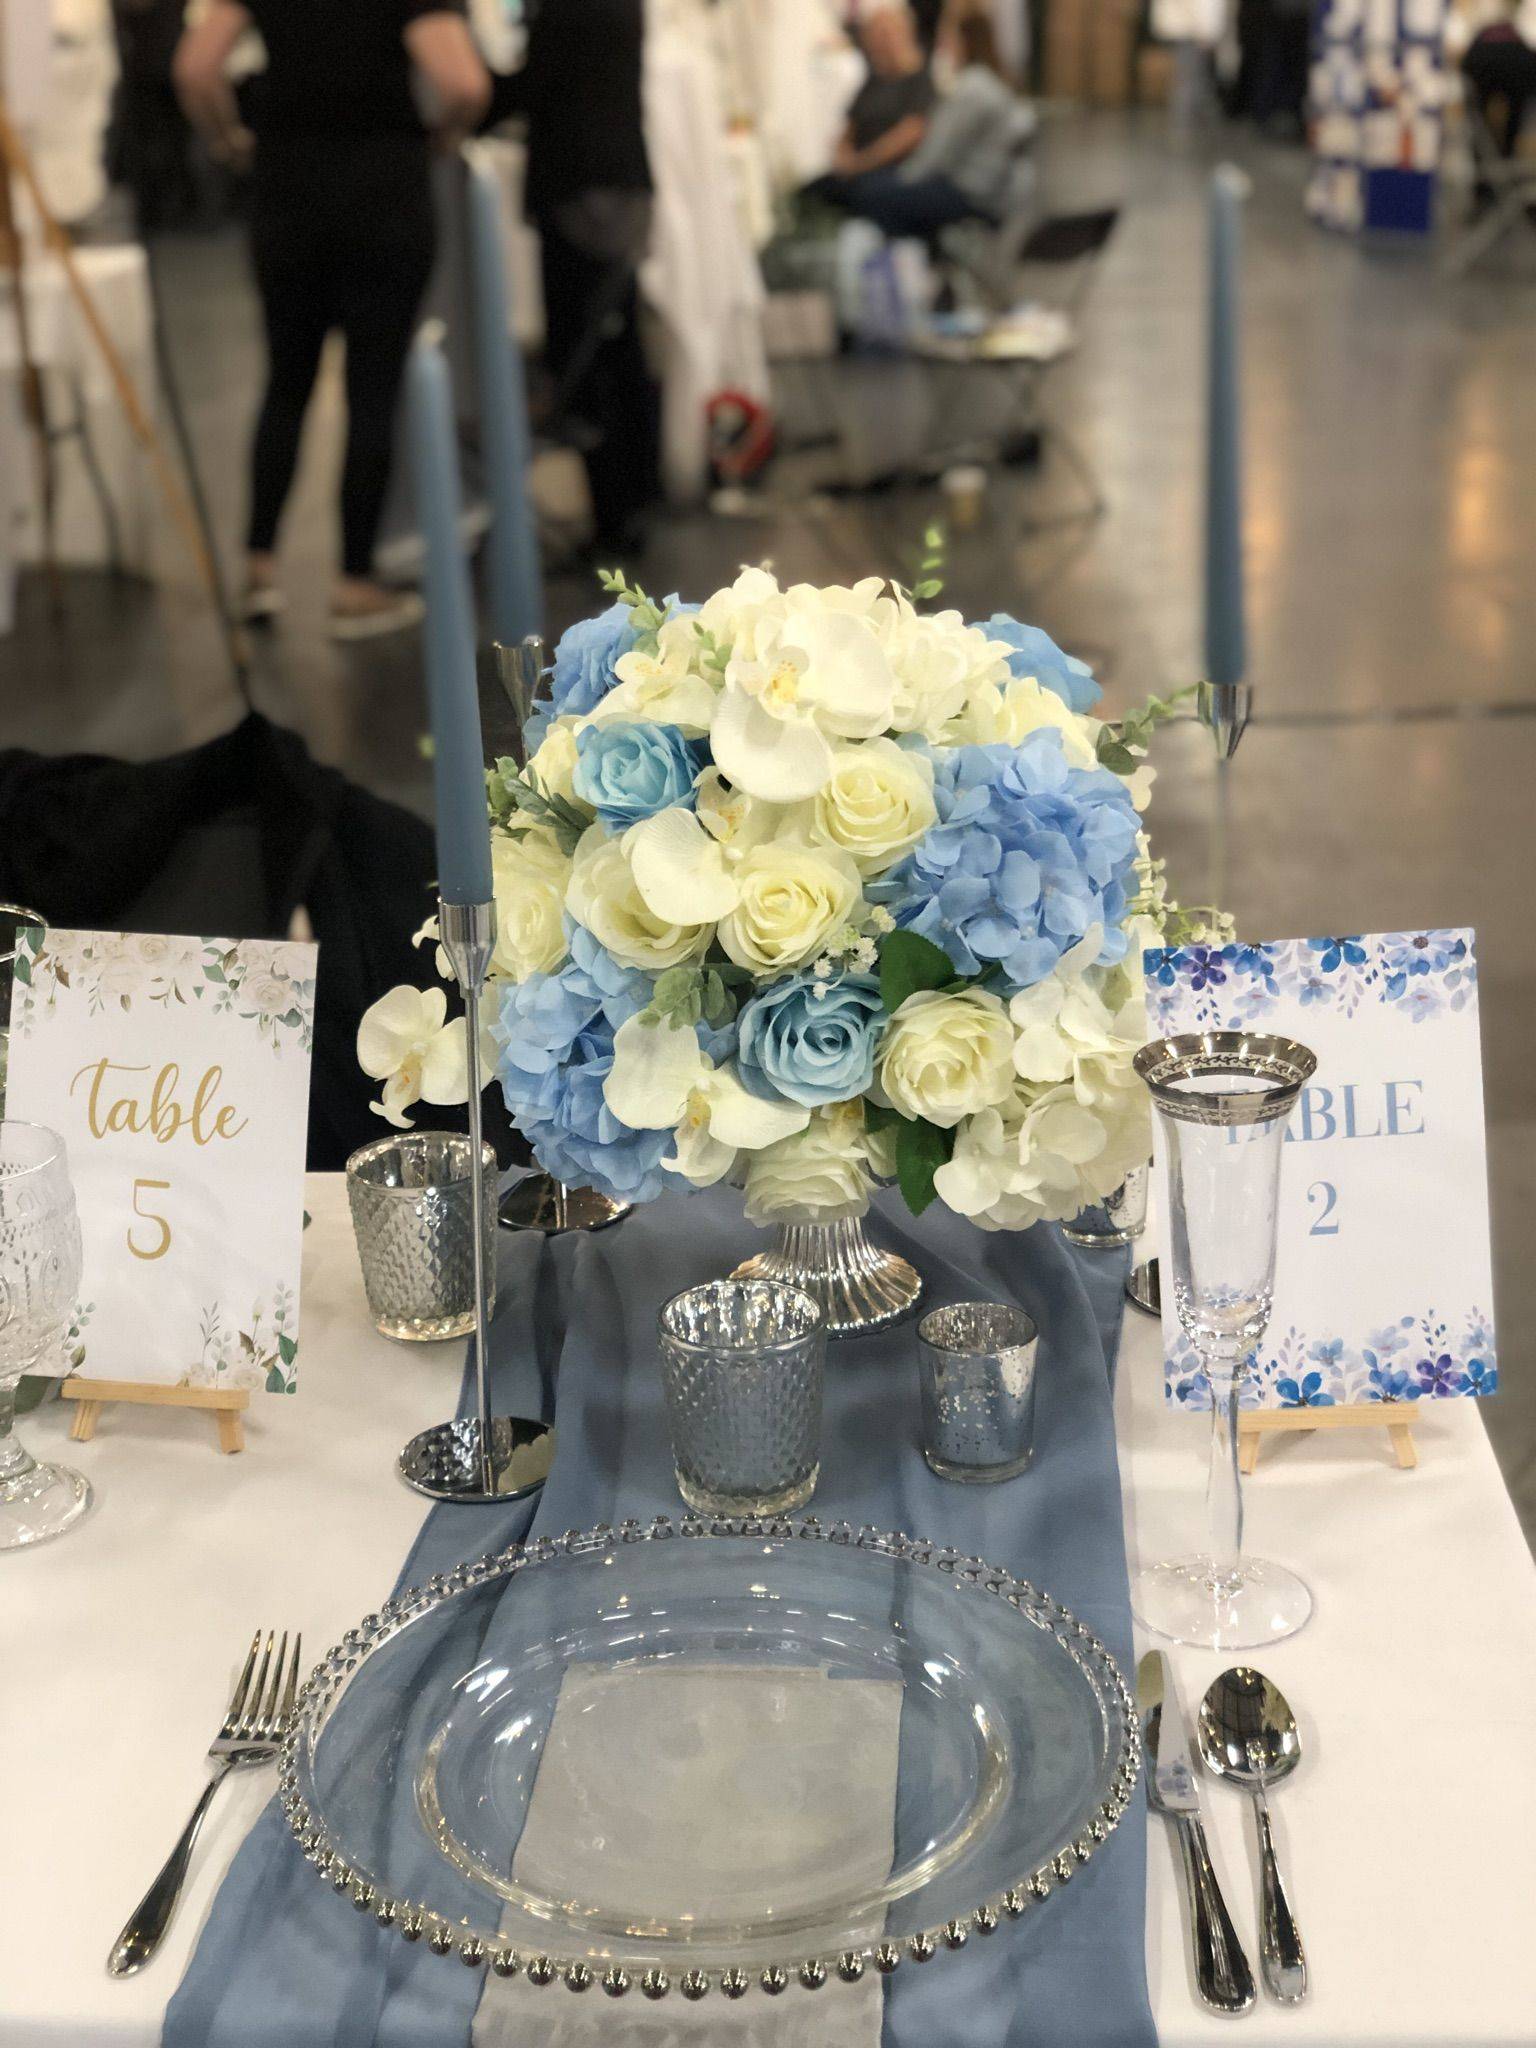 a table set for a formal dinner with blue and white flowers.